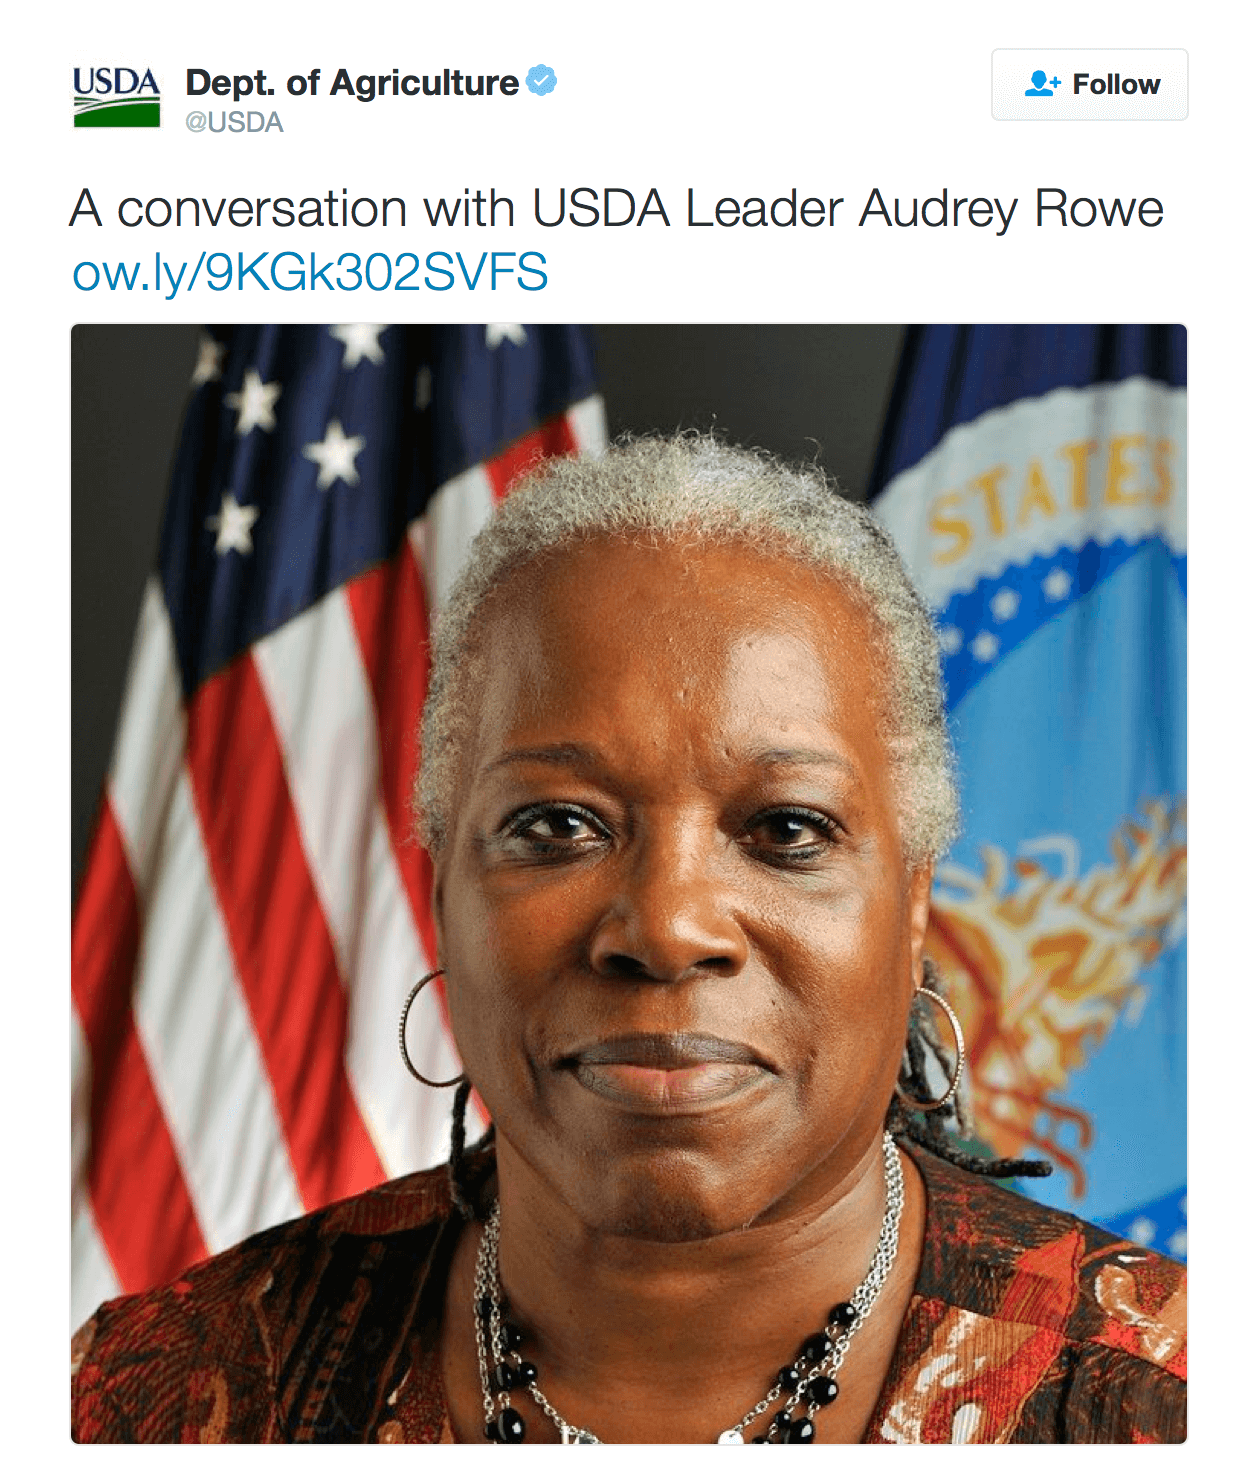 A conversation with USDA Leader Audrey Rowe http://ow.ly/9KGk302SVFS 